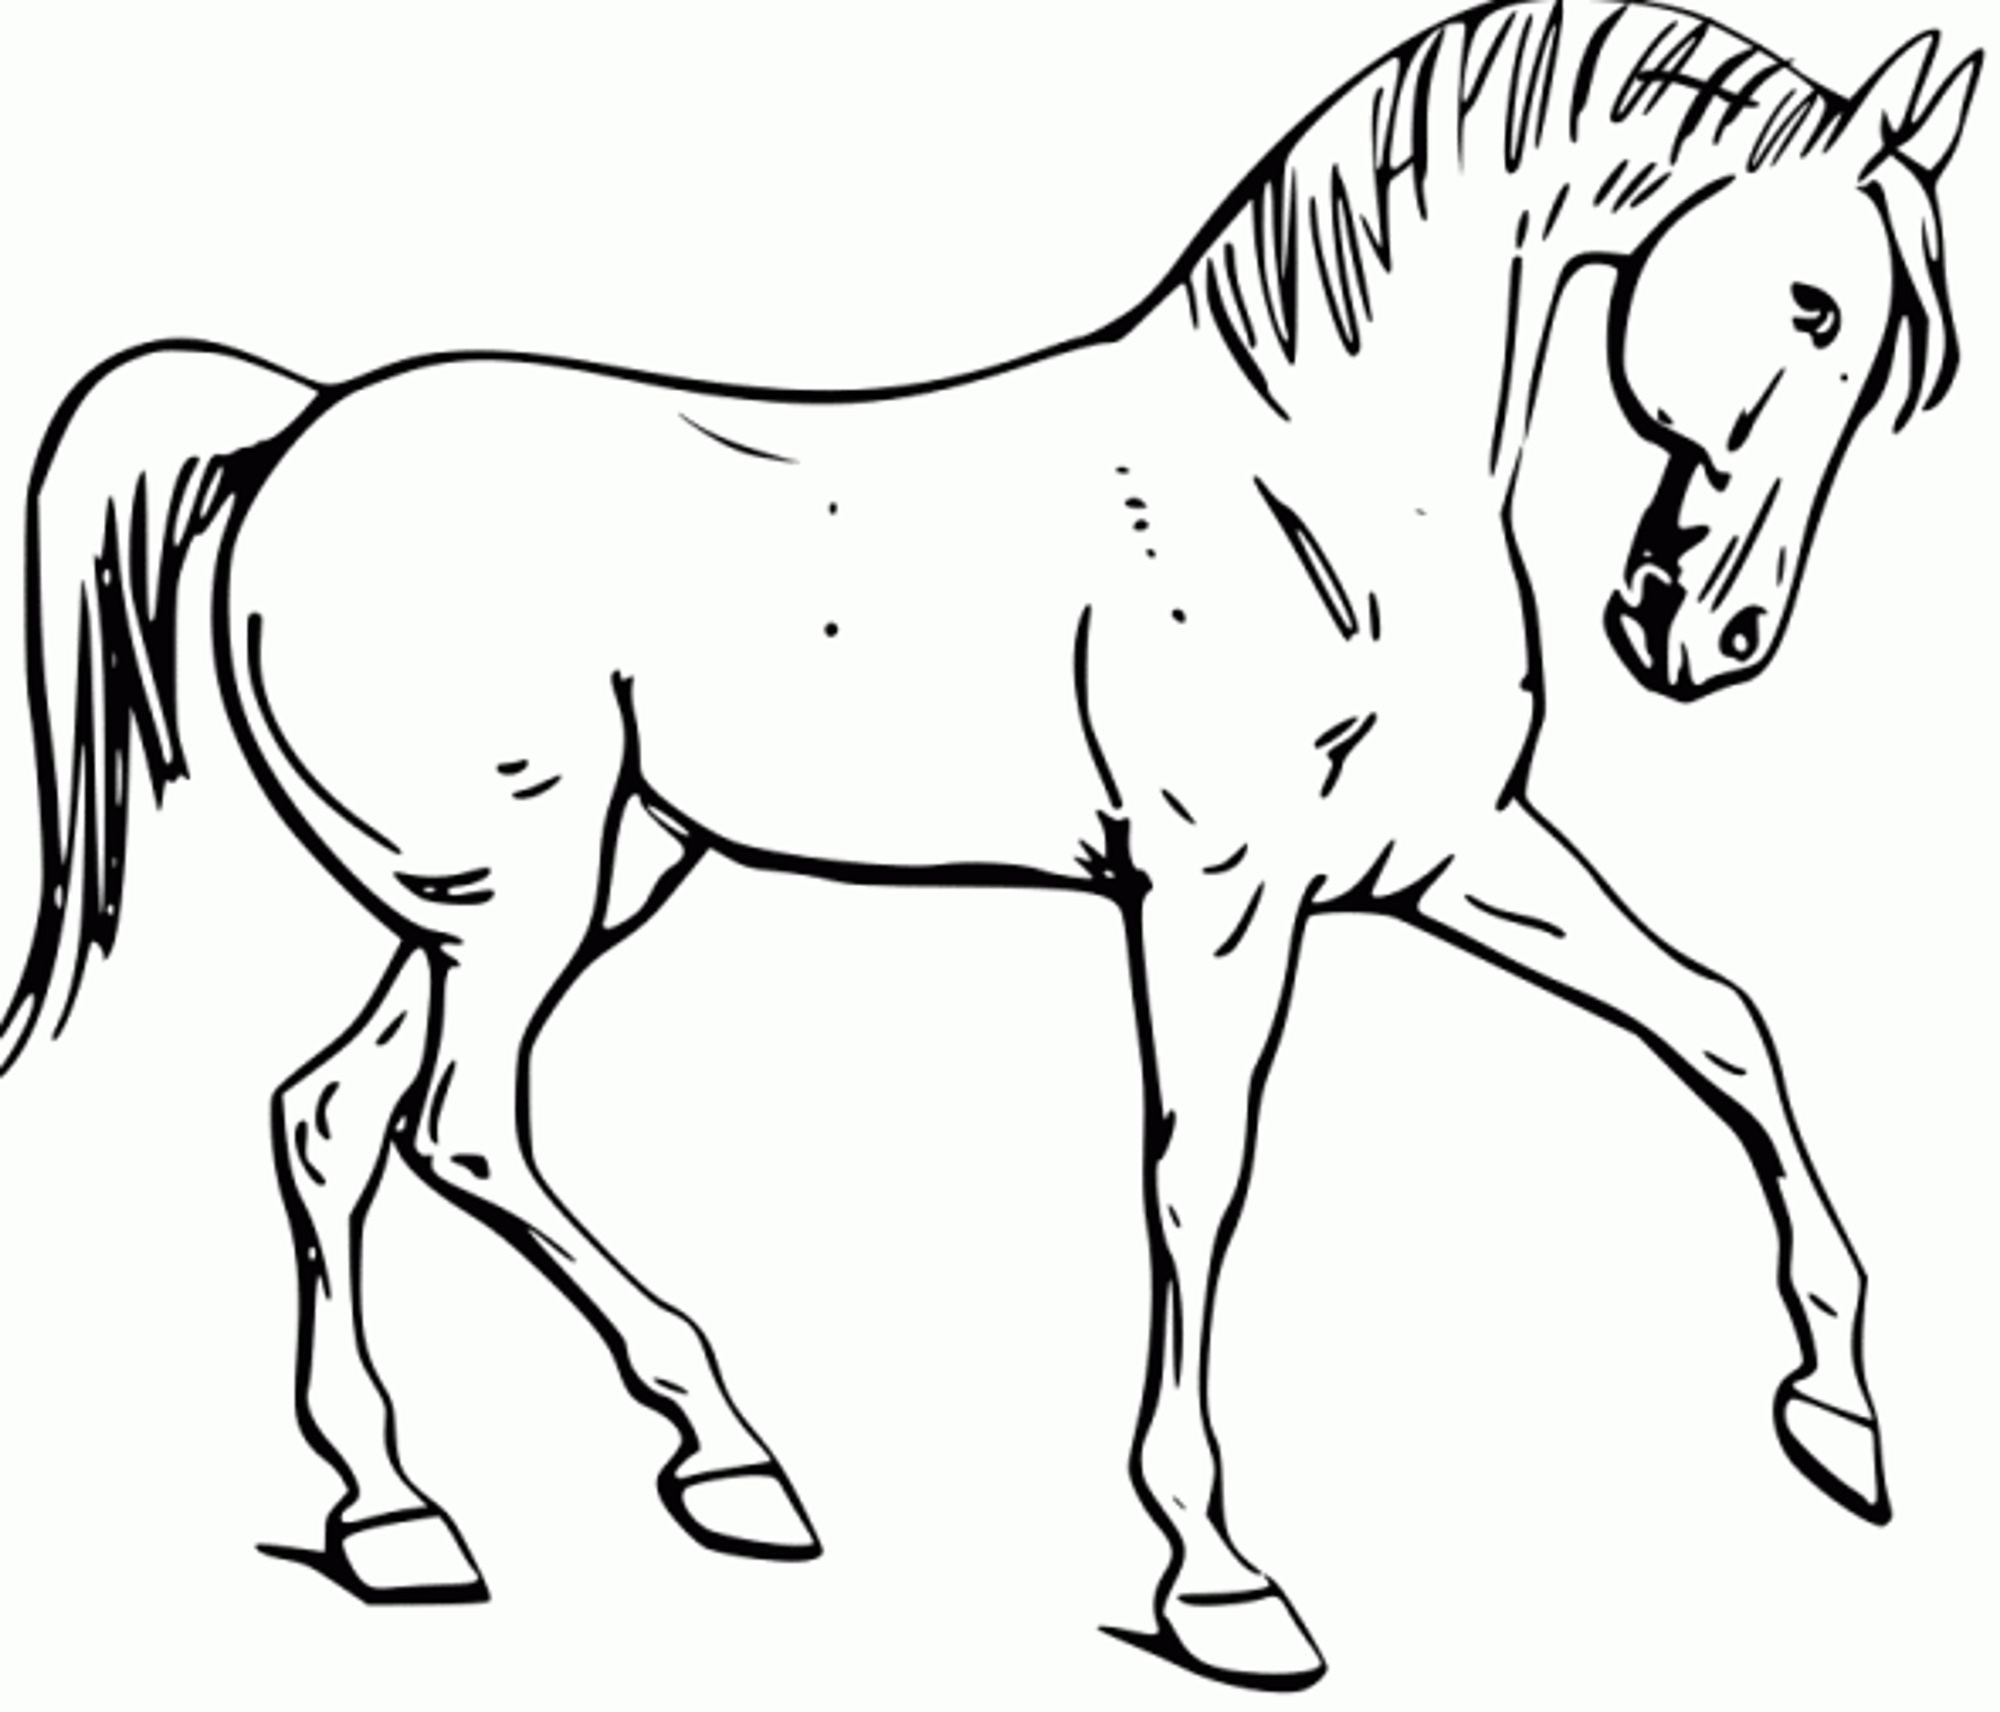 Horse Coloring Pages For Older Kids
 Fun Horse Coloring Pages for Your Kids Printable